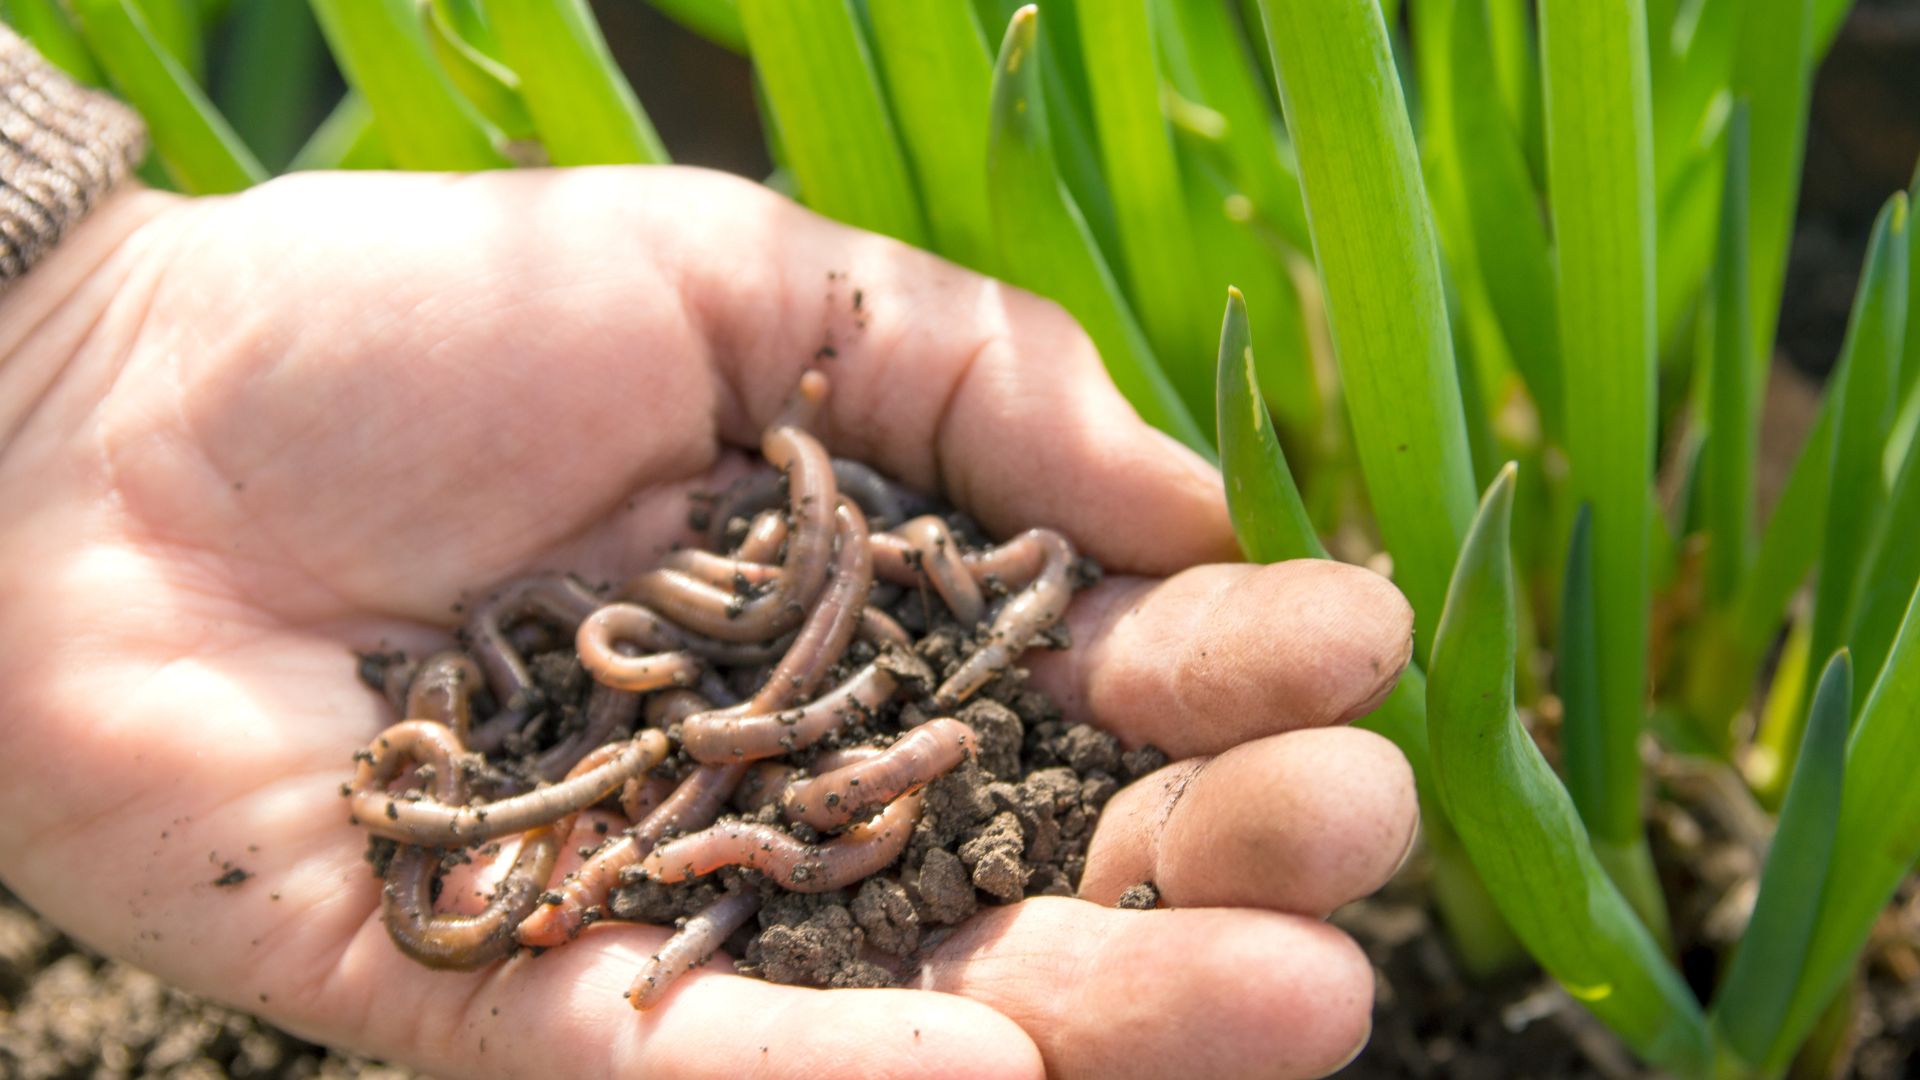 Why Are Earthworms So Good For Our Soil?